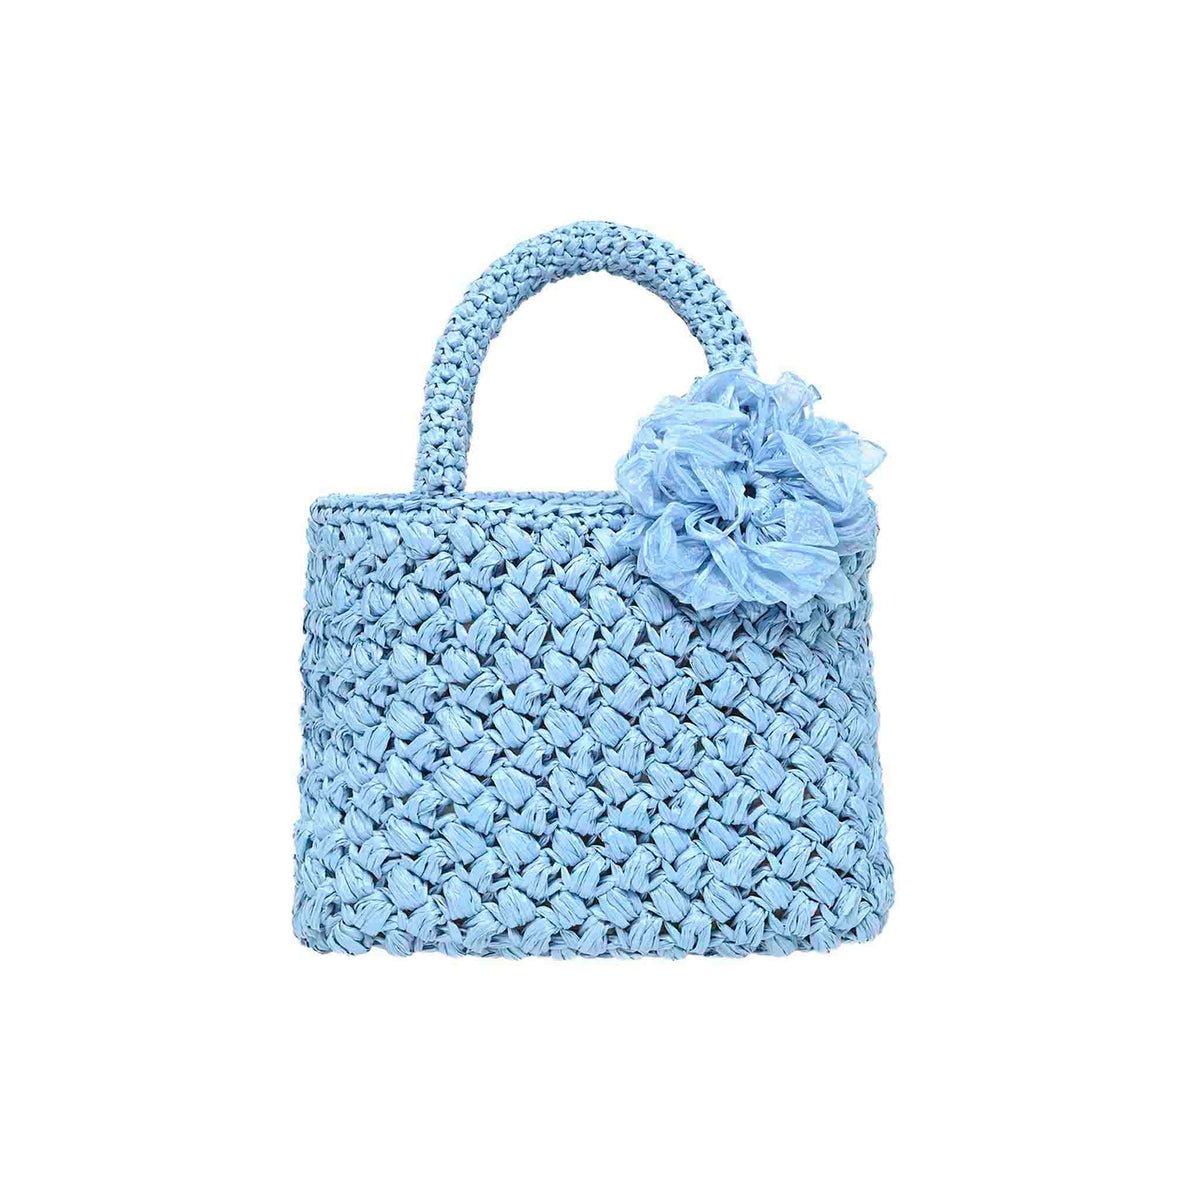 Baby Blue mini Raffia bag toy storage for on-the-go for beach and vacation from Carmen Sol, made in Italy.